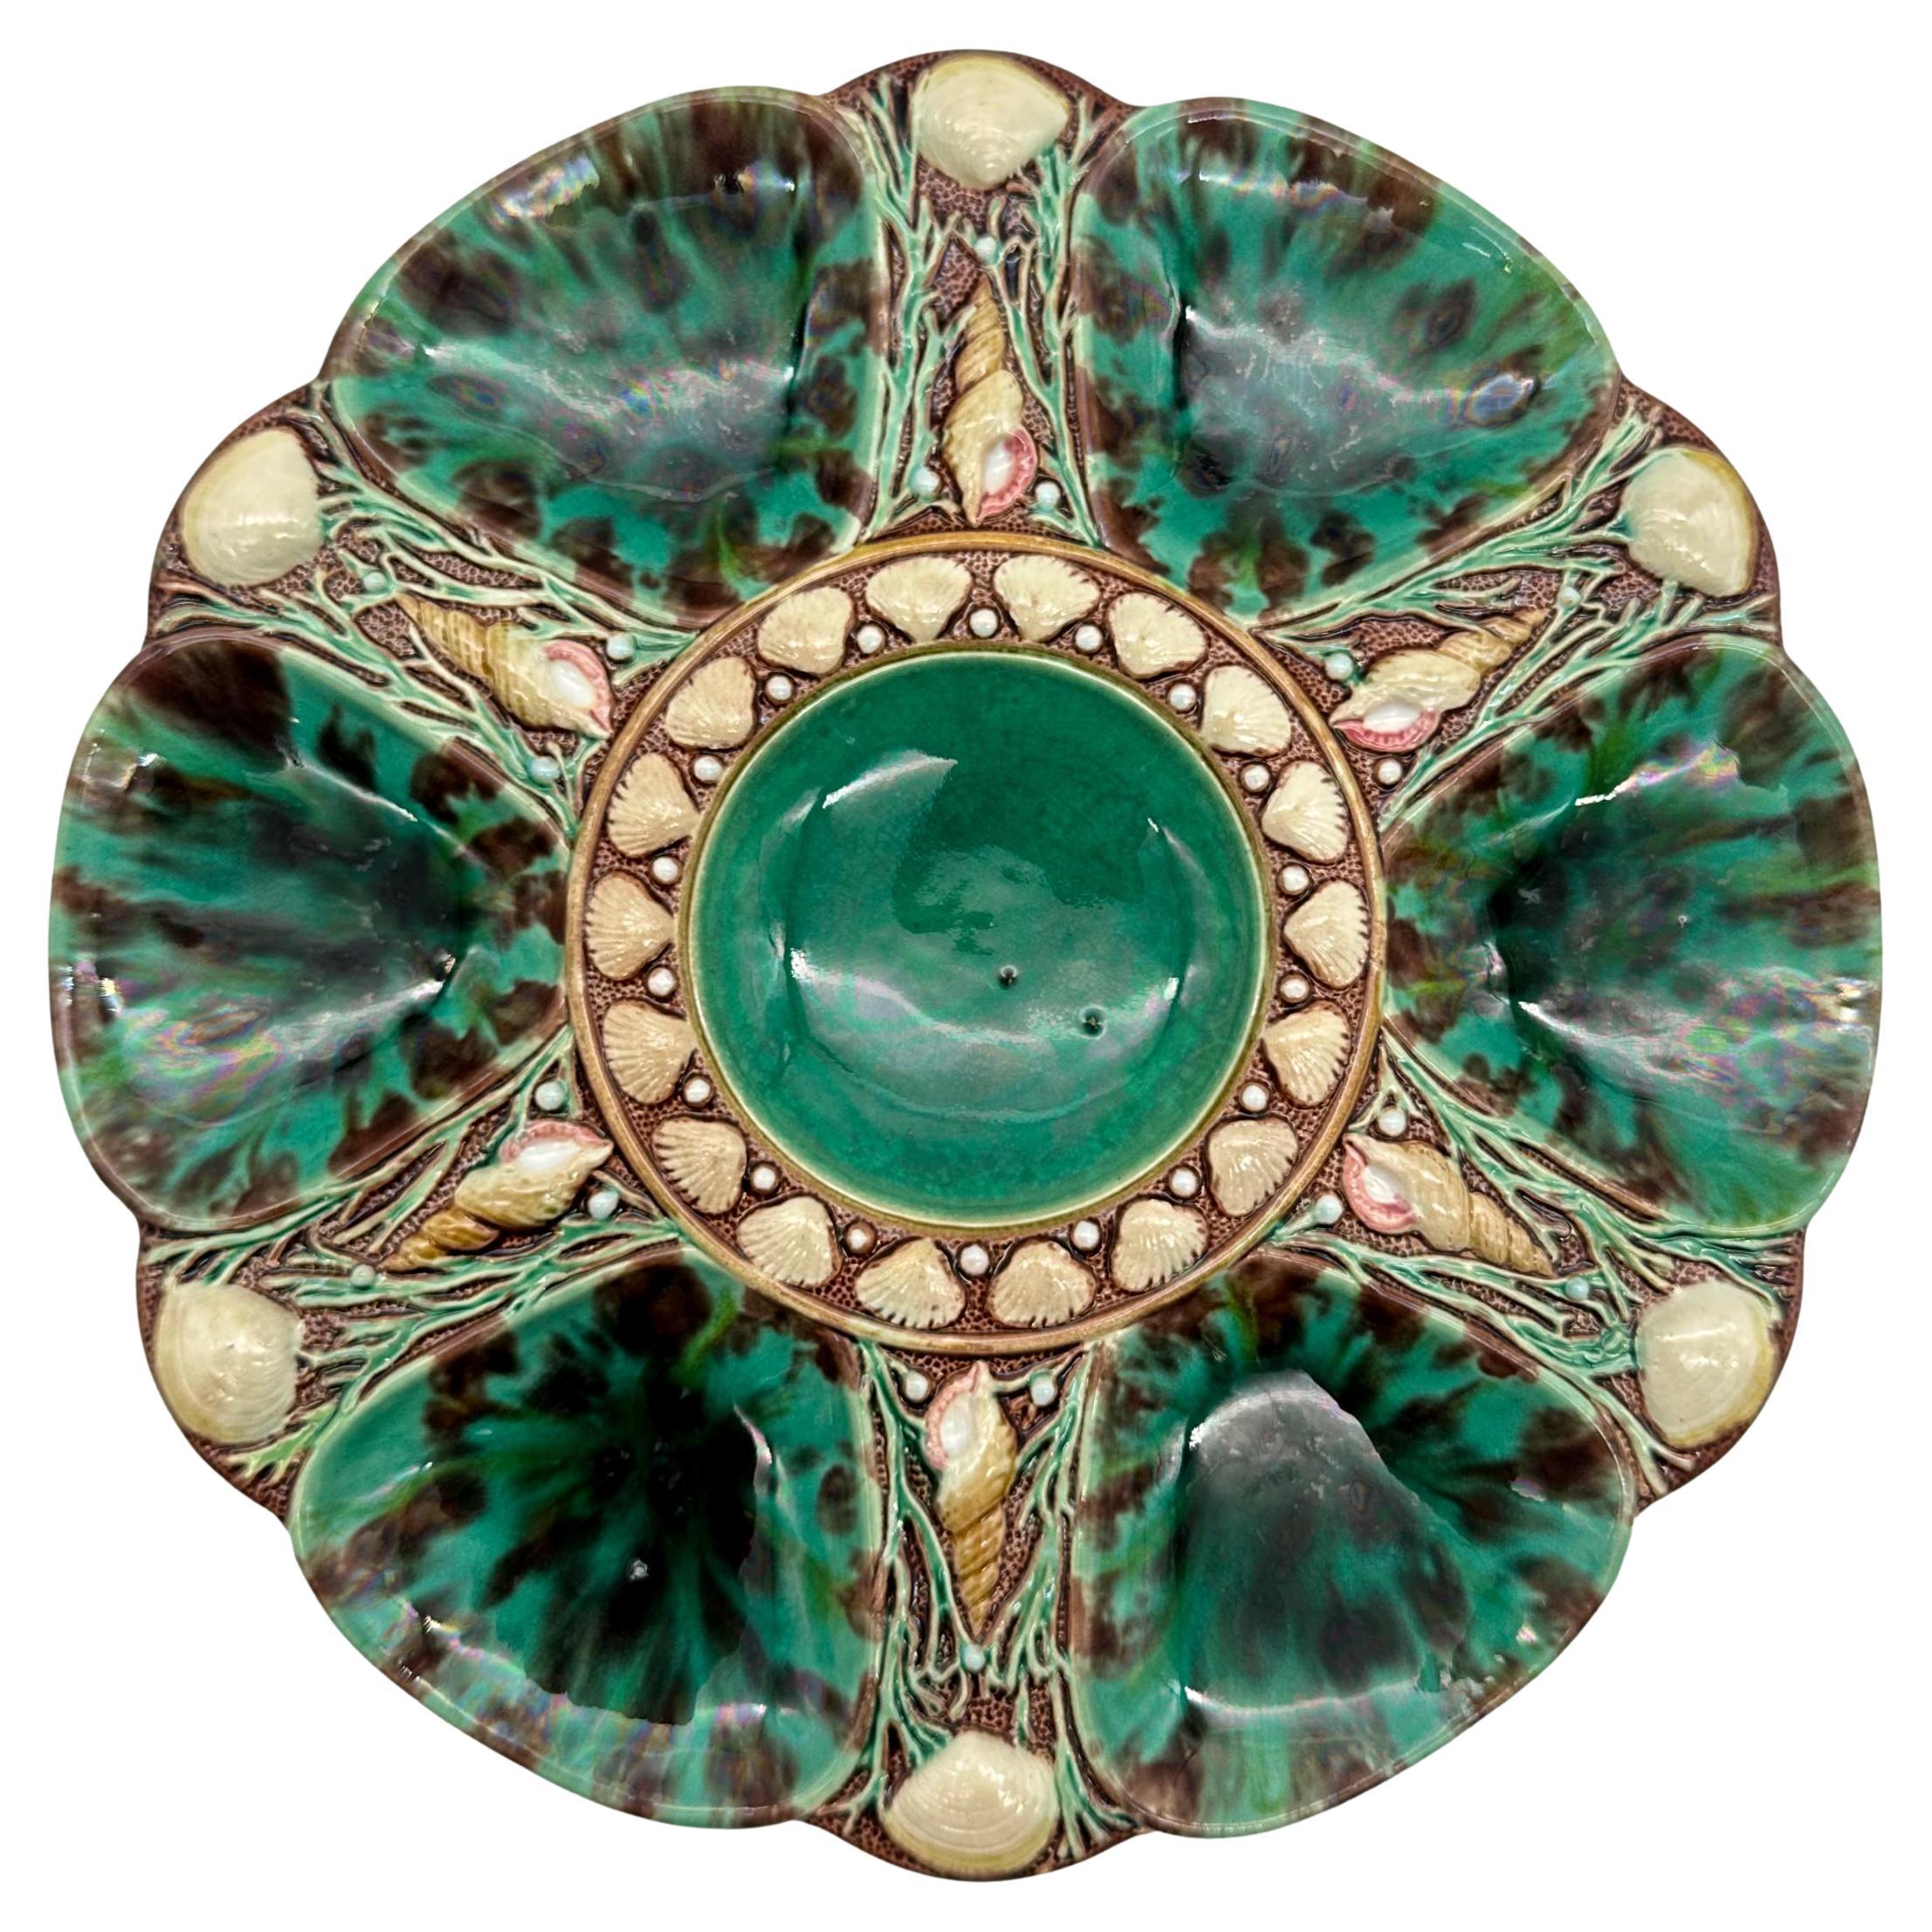 Minton Majolica Oyster Plate, Mottled Leopard Spots, English, Dated 1871 For Sale